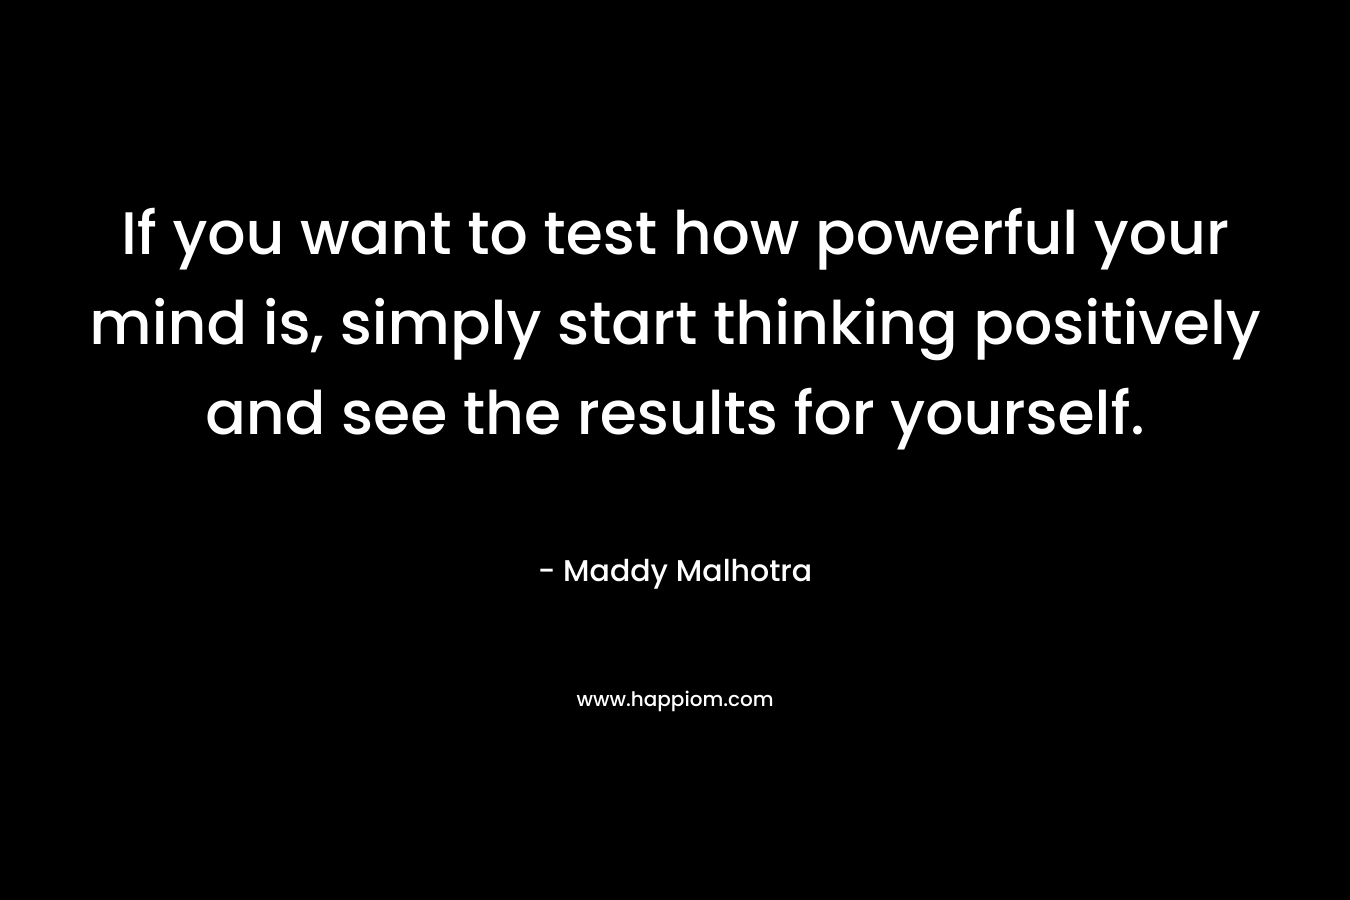 If you want to test how powerful your mind is, simply start thinking positively and see the results for yourself. – Maddy Malhotra